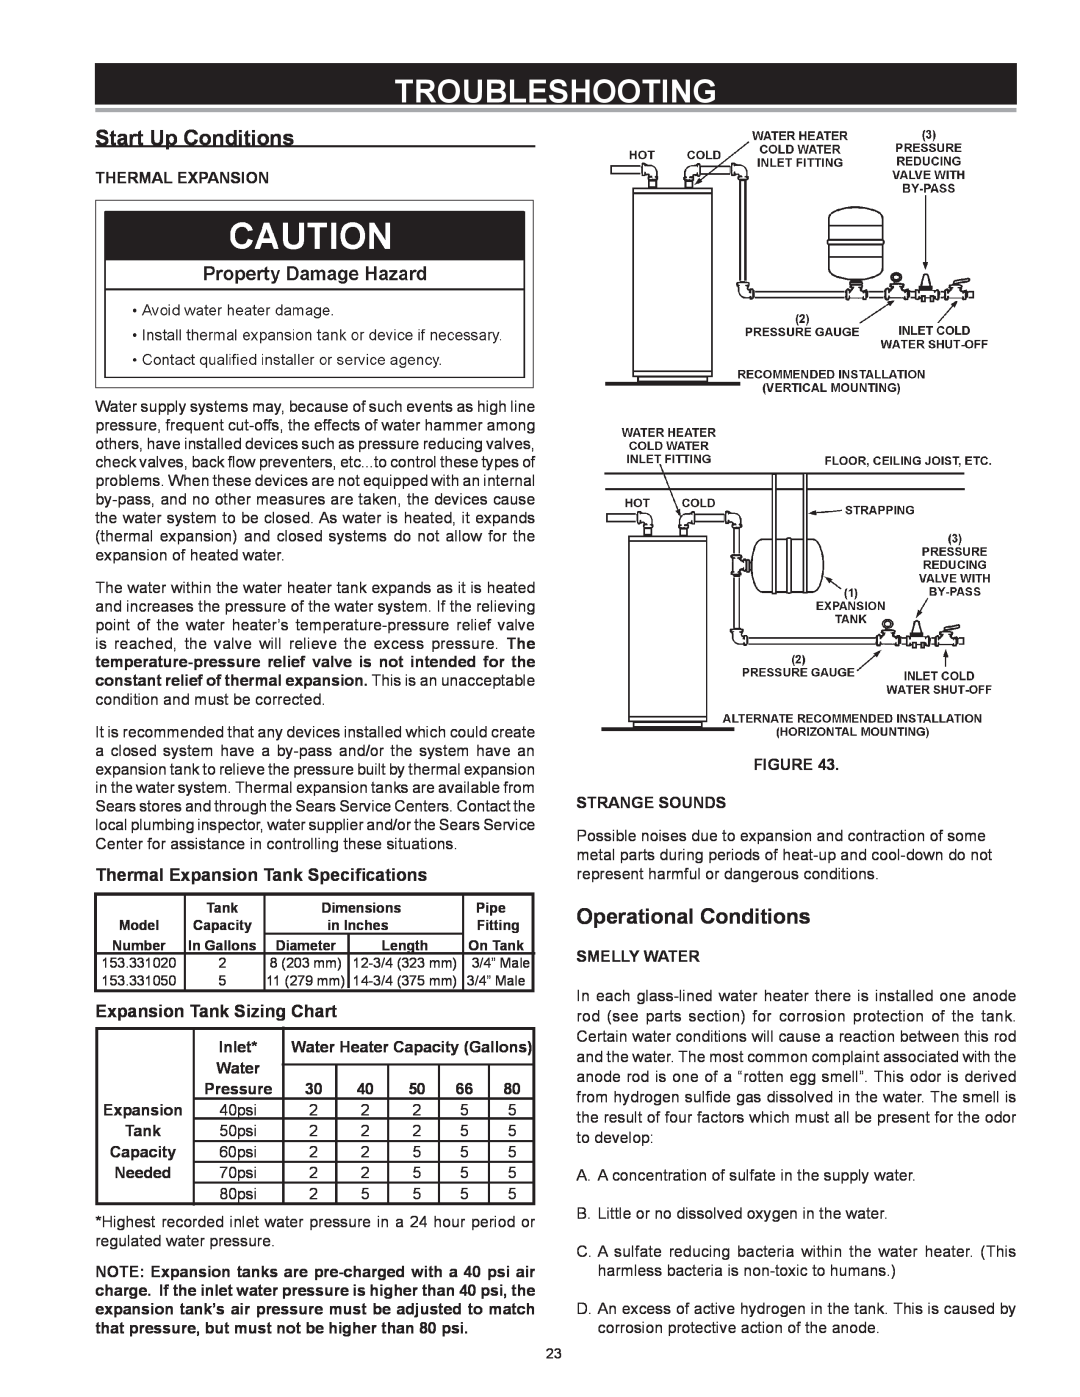 Kenmore 153 Troubleshooting, Start Up Conditions, Operational Conditions, Thermal Expansion Tank Specifications 